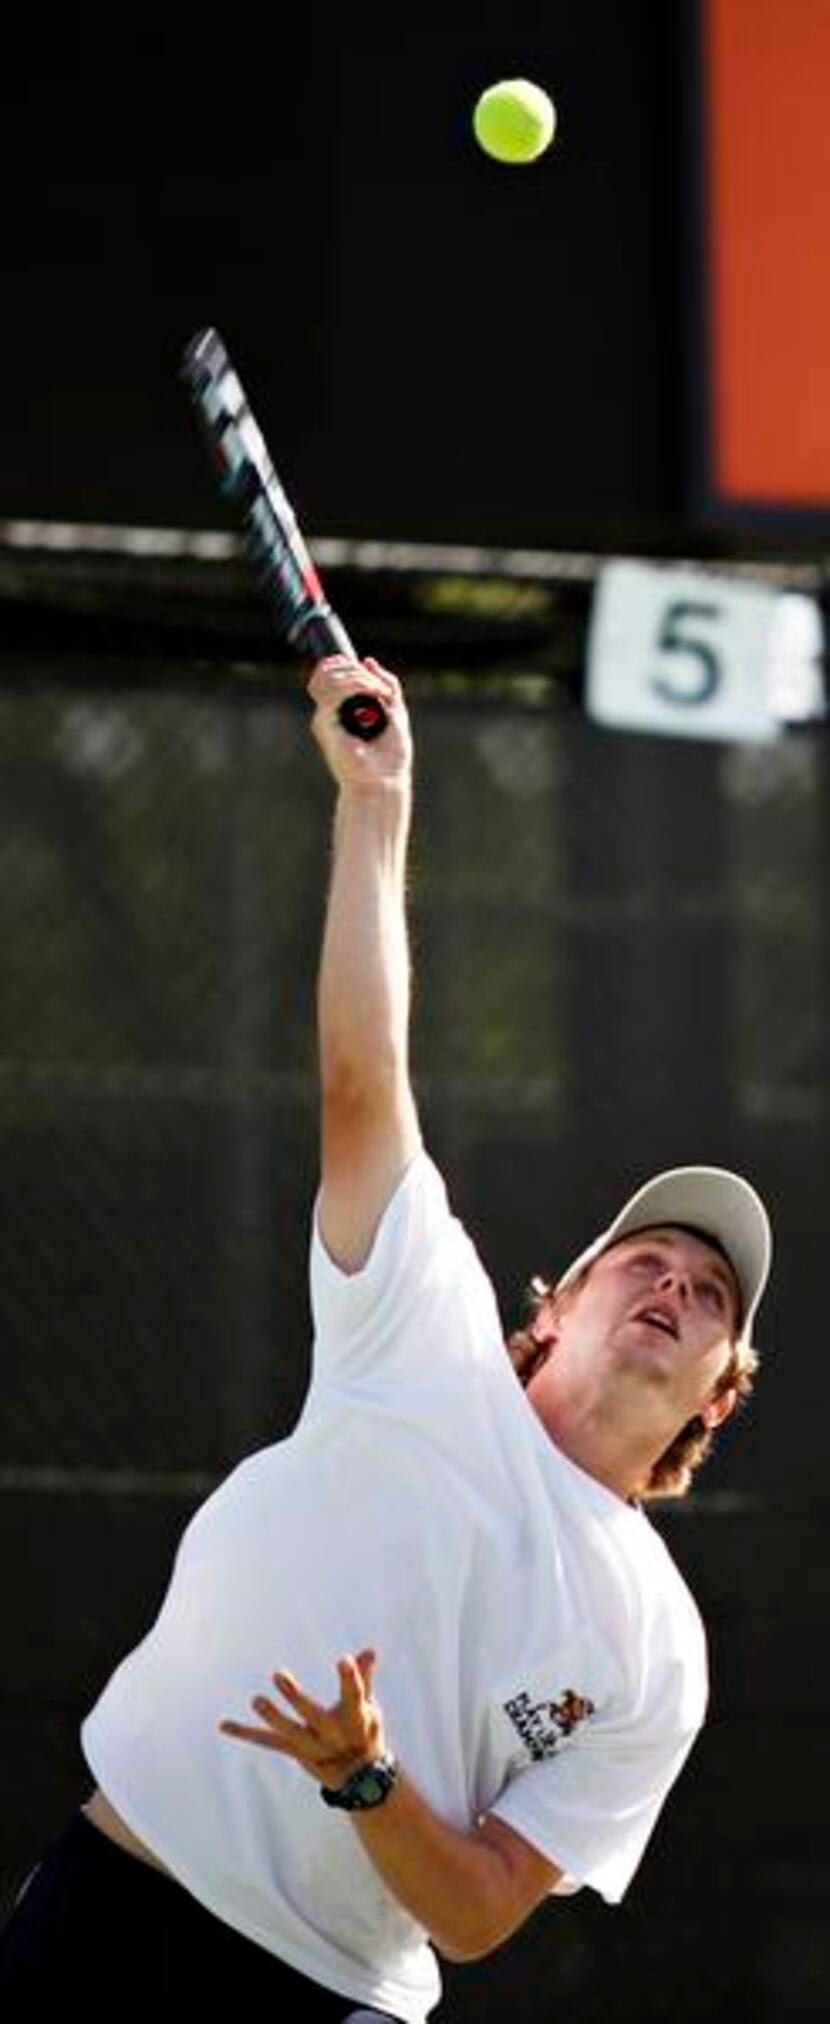 McCullough throws up a serve during his mixed-doubles final with Tedford.